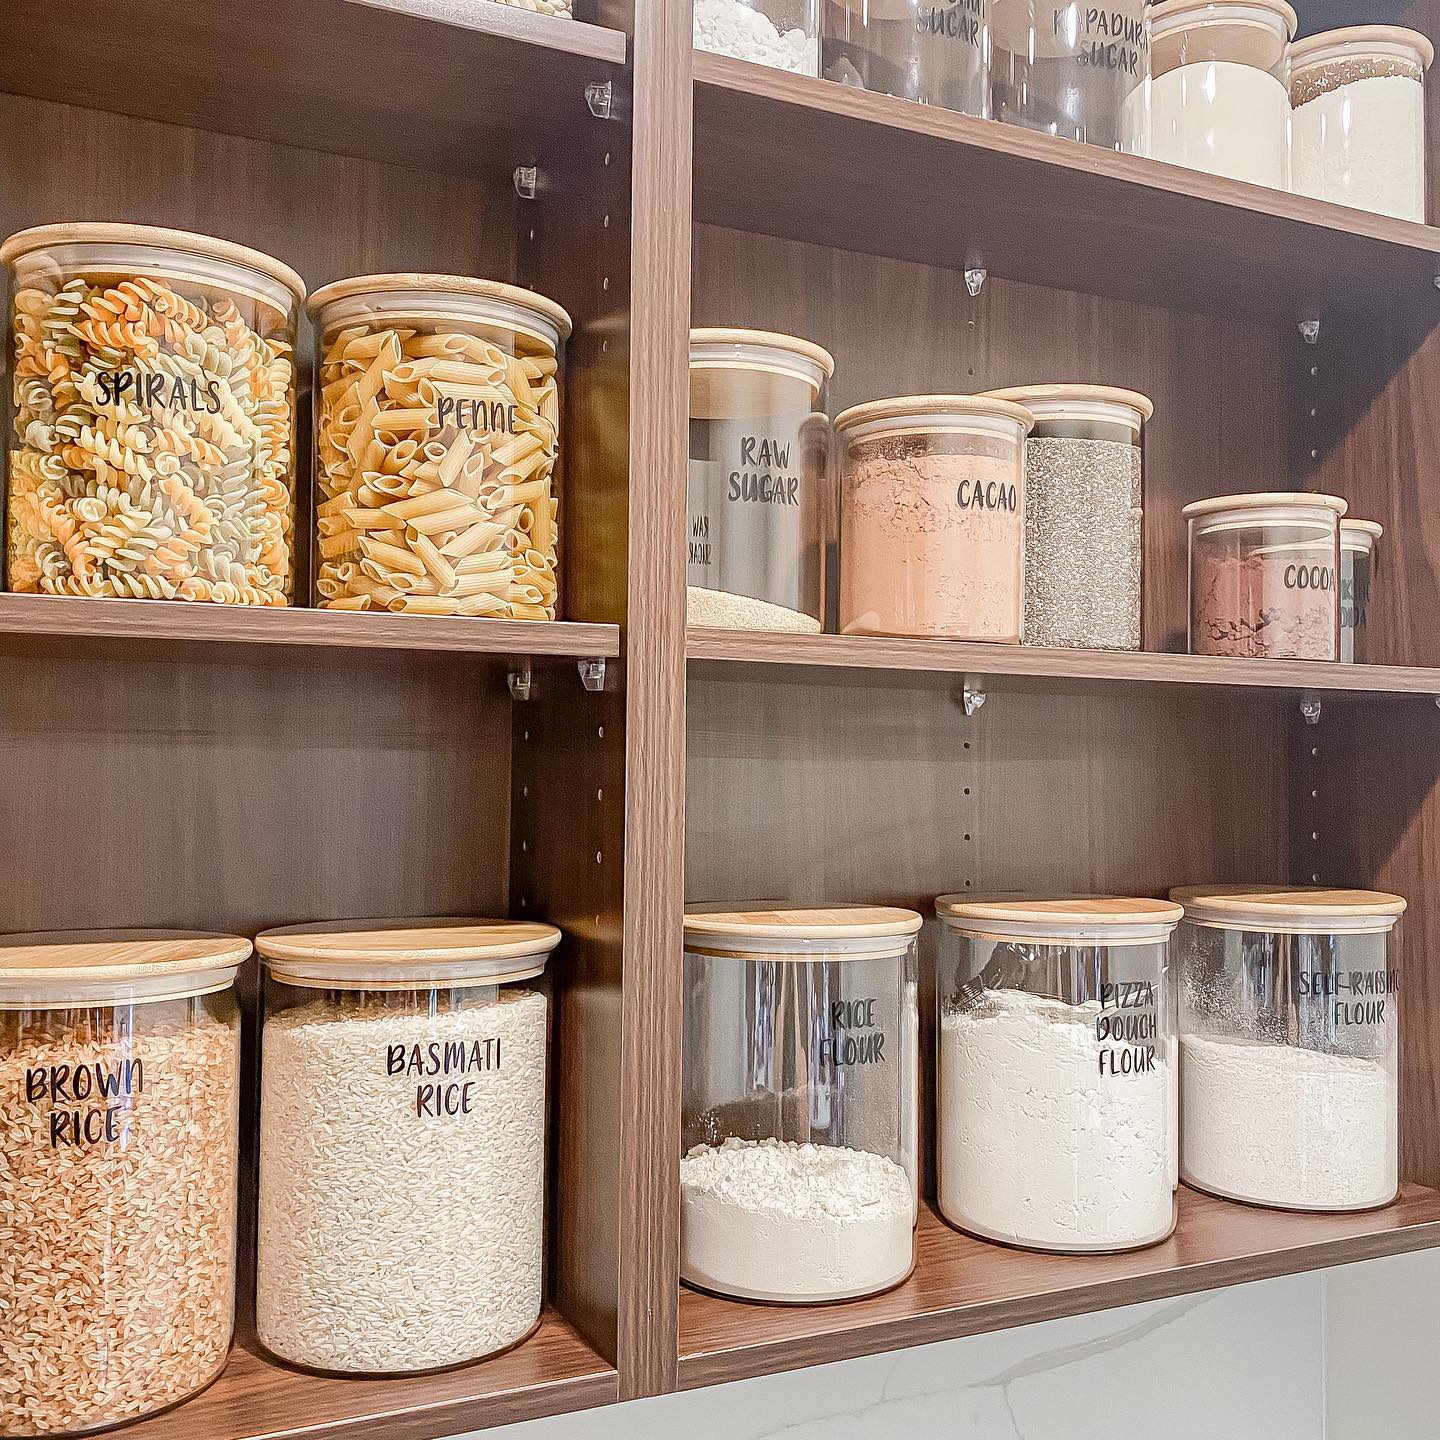 A kitchen with jars filled with cereals and other foods, perfect for organization.